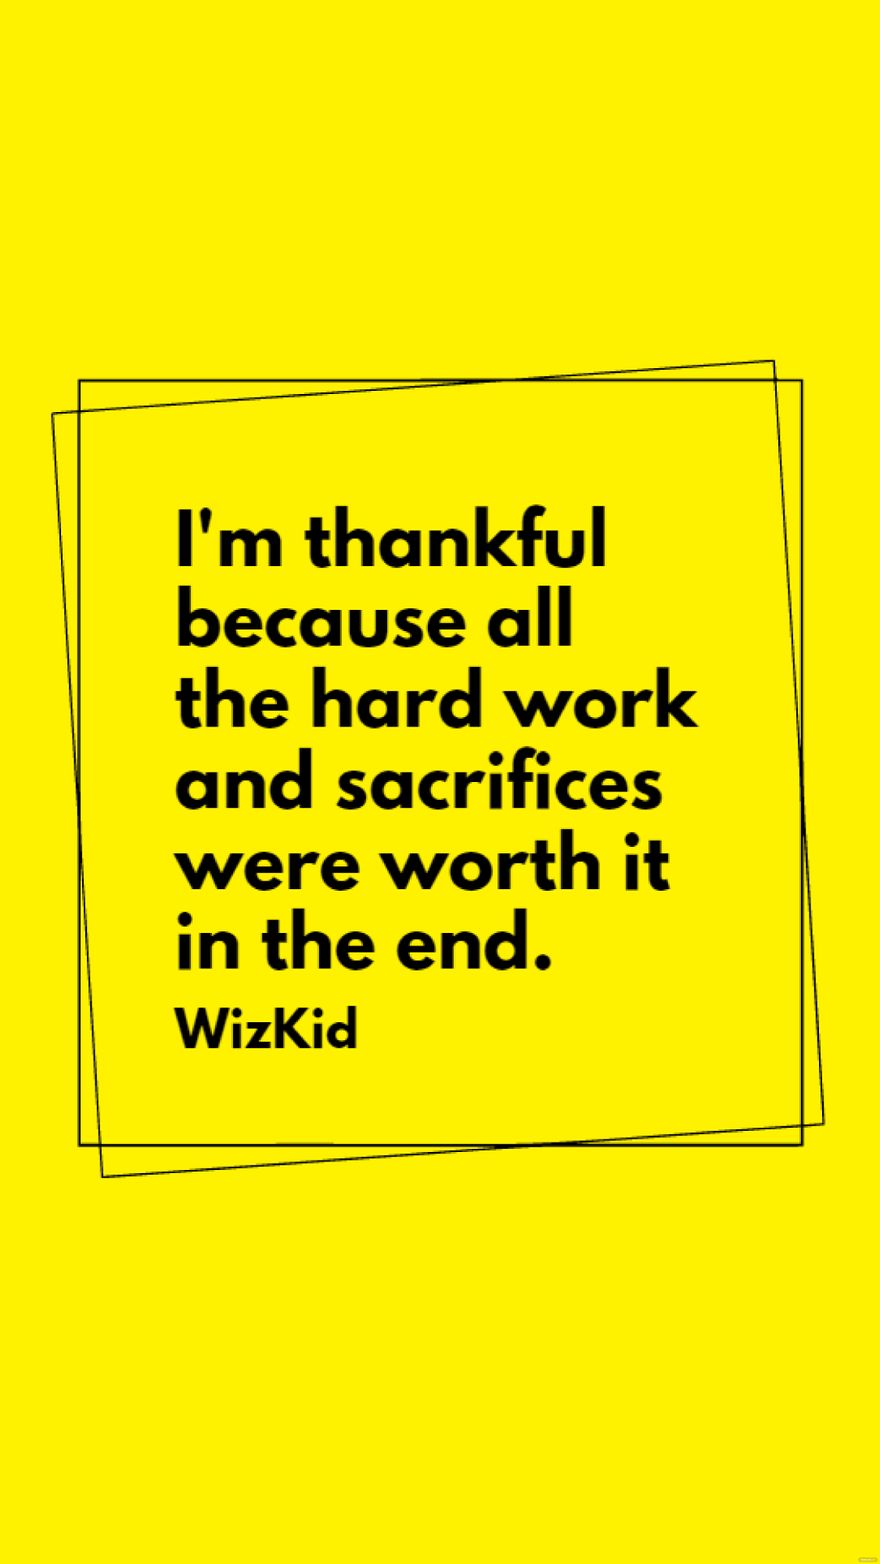 Free WizKid - I'm thankful because all the hard work and sacrifices were worth it in the end. in JPG